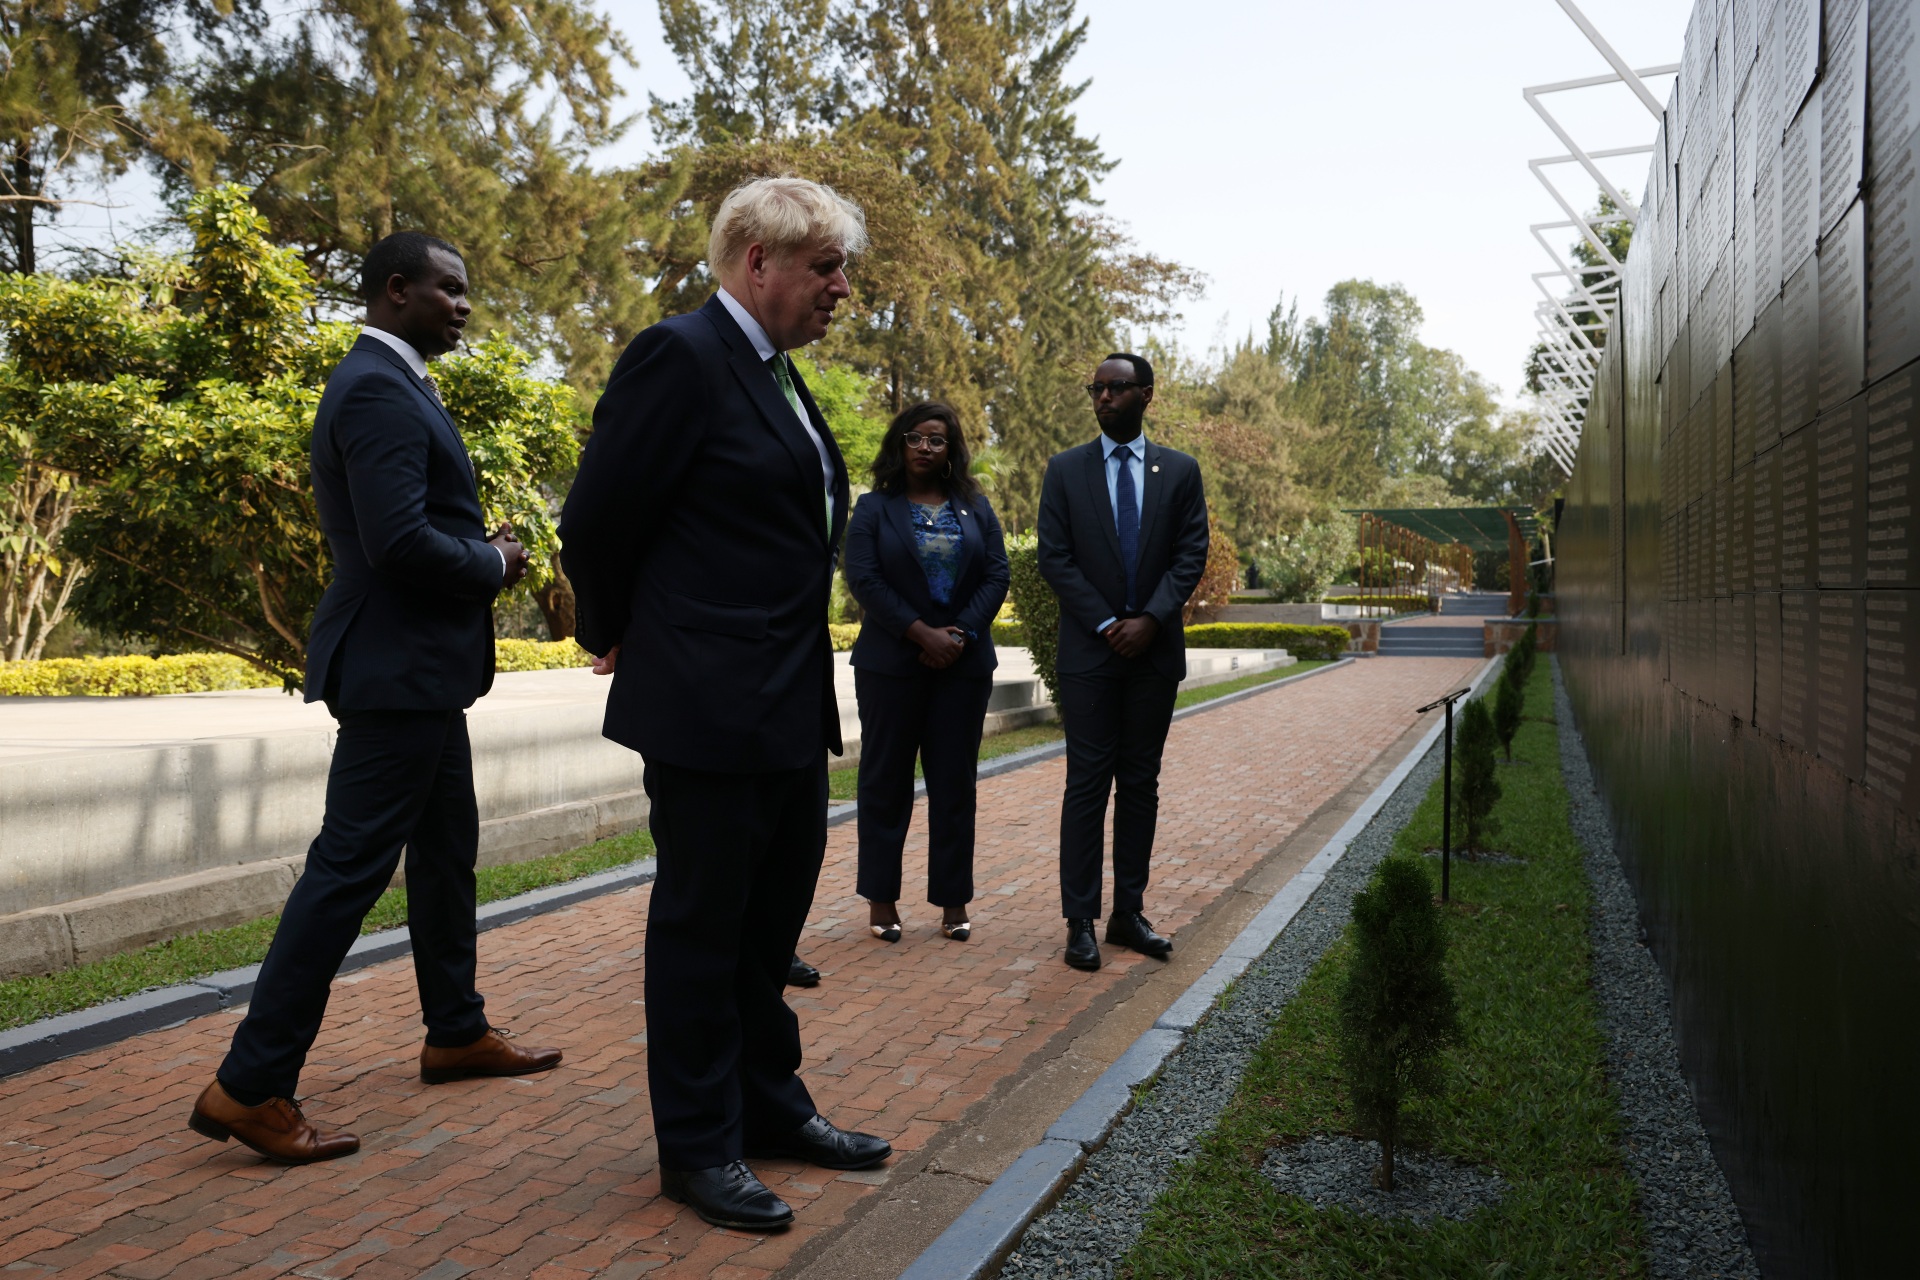 KIGALI, RWANDA - JUNE 23: British Prime Minister Boris Johnson seen with (L) Freddy Mutanguha, Executive Director for the Aegis Trust visits the Wall of Remembrance at the Kigali Genocide Memorial, on June 23, 2022 in Kigali, Rwanda. Leaders of Commonwealth countries meet every two years for the Commonwealth Heads of Government Meeting (CHOGM), hosted by different member countries on a rotating basis. Since 1971, a total of 24 meetings have been held, with the most recent being in the UK in 2018. (Photo by Dan Kitwood/Getty Images)